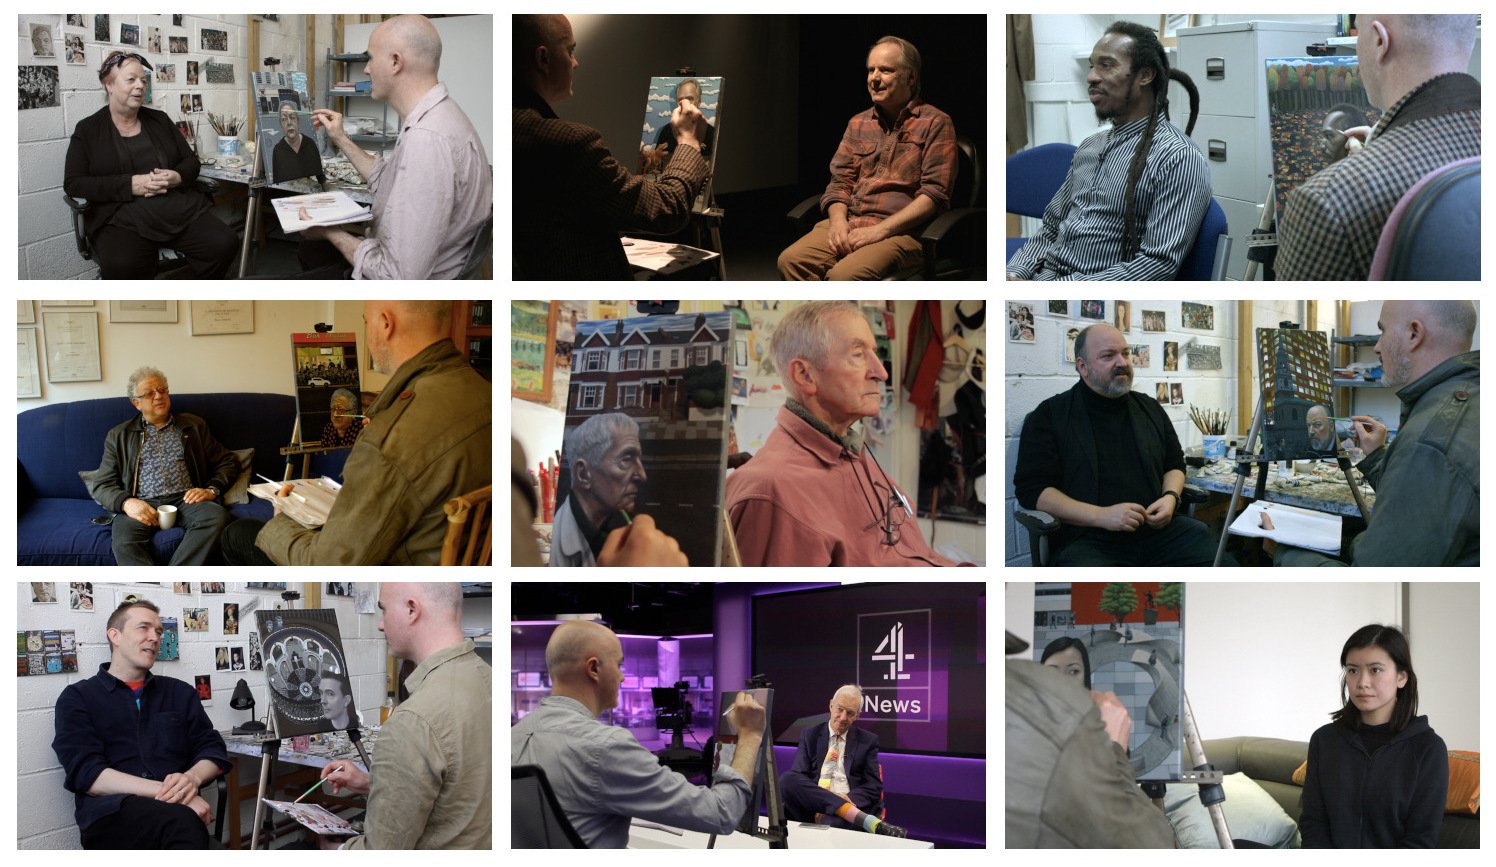  Stills from  ‘London Portraits’  documentary, showing Carl Randall painting &amp; interviewing participants (figures who have contributed to British arts, society &amp; culture).  Watch video here.    Top row:  Comedian Jo Brand, Director Nick Park,